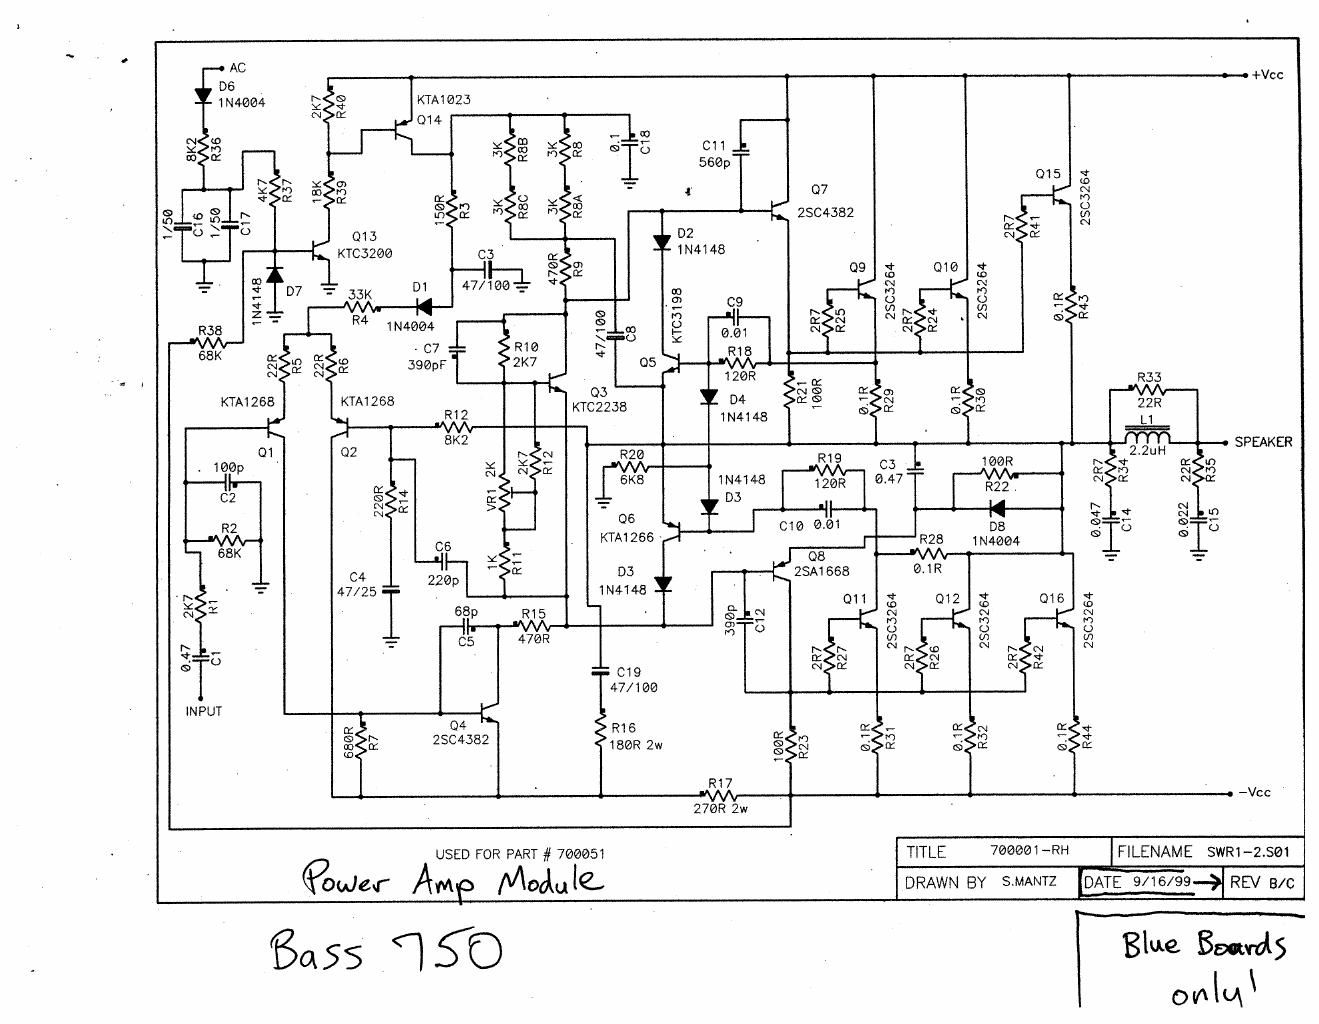 swr 750 amp blue boards only schematic